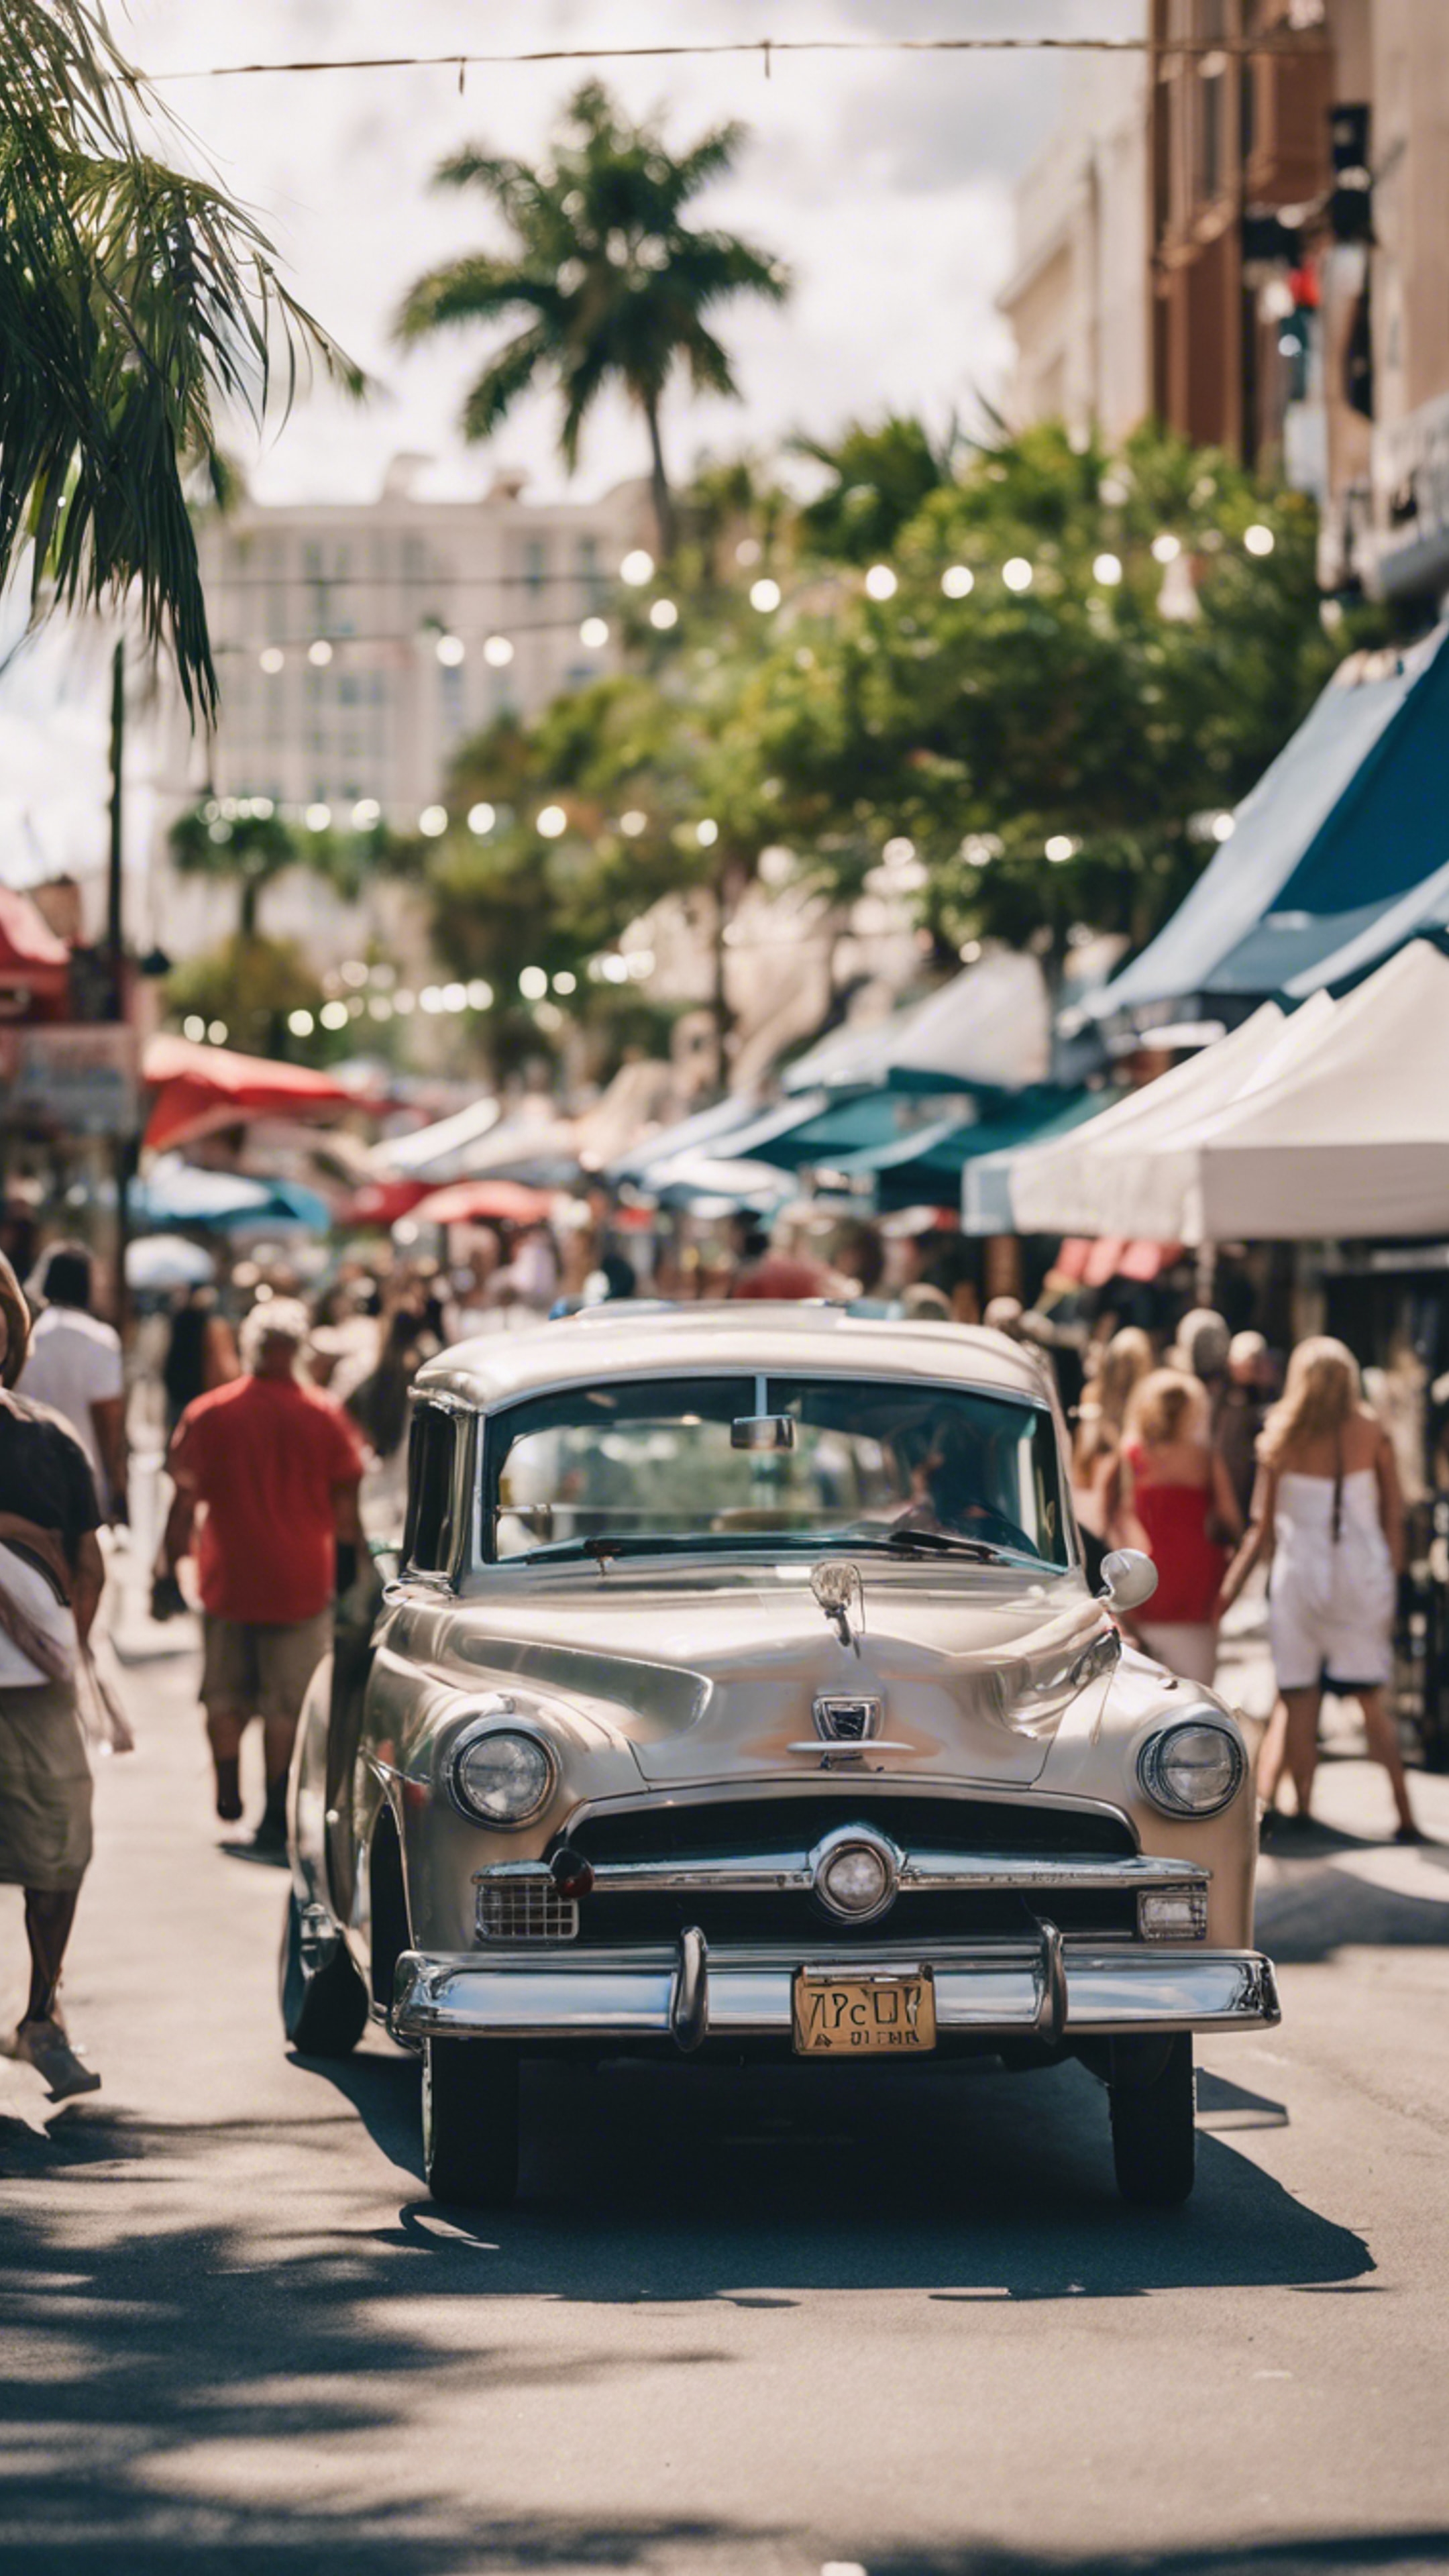 The art and culture-filled streets of downtown West Palm Beach on a Saturday Market Day. 벽지[9e1e82f0b2784fd0ae58]